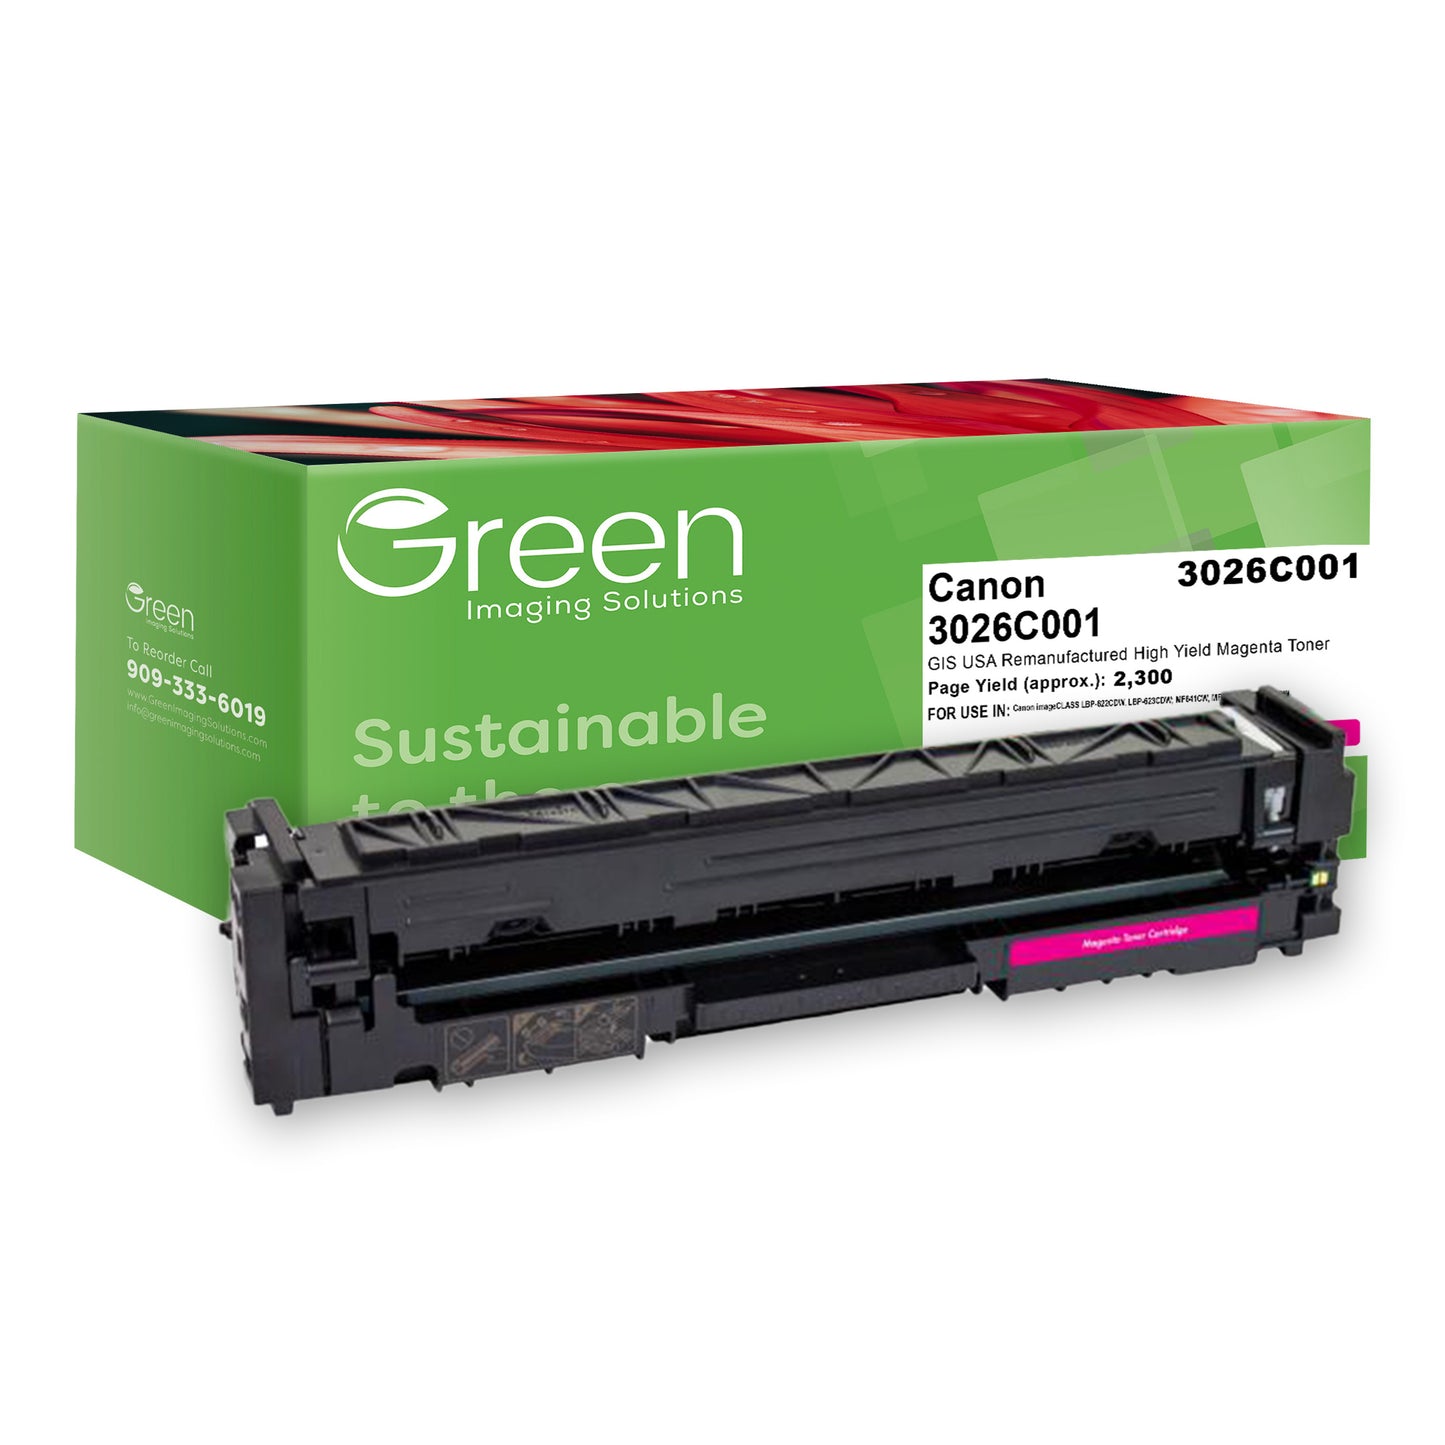 Green Imaging Solutions USA Remanufactured High Yield Magenta Toner Cartridge for Canon 054H (3026C001)